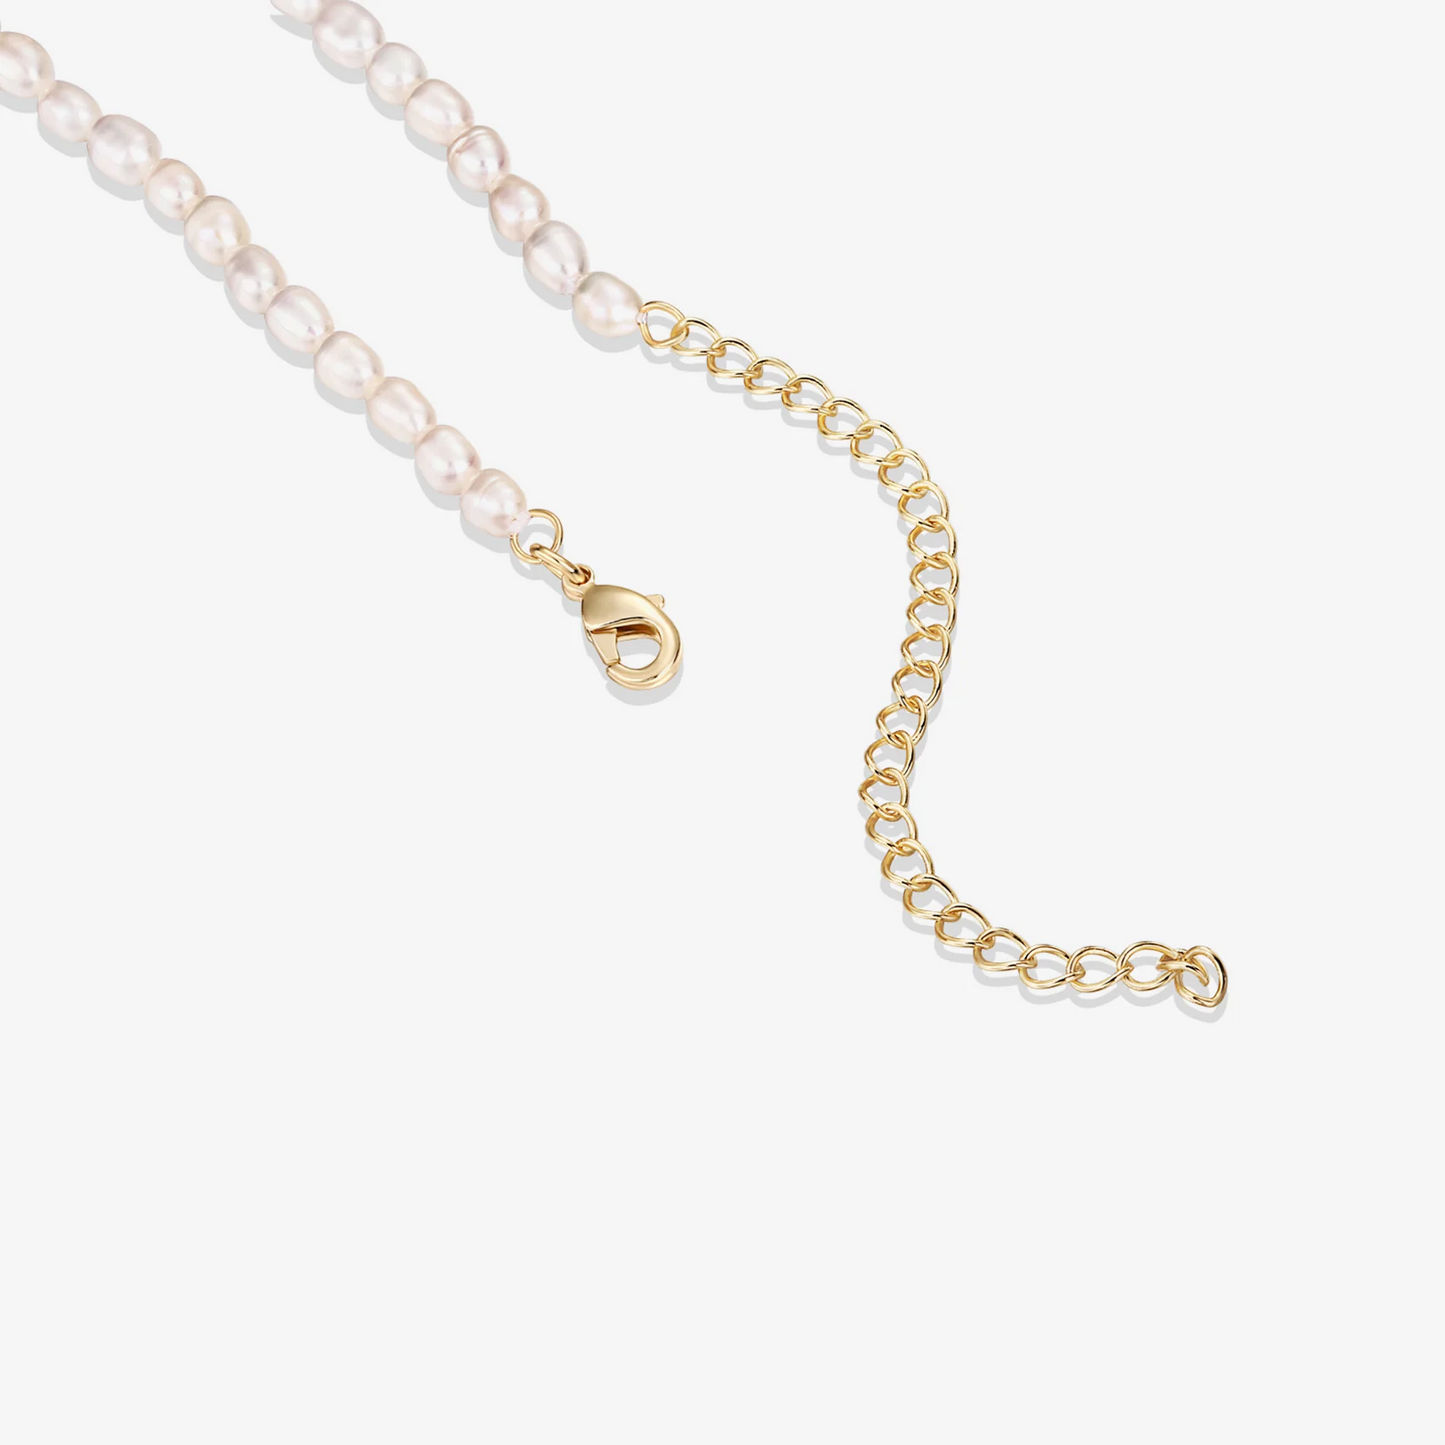 Freshwater Pearl Chain Necklace Gift for Her